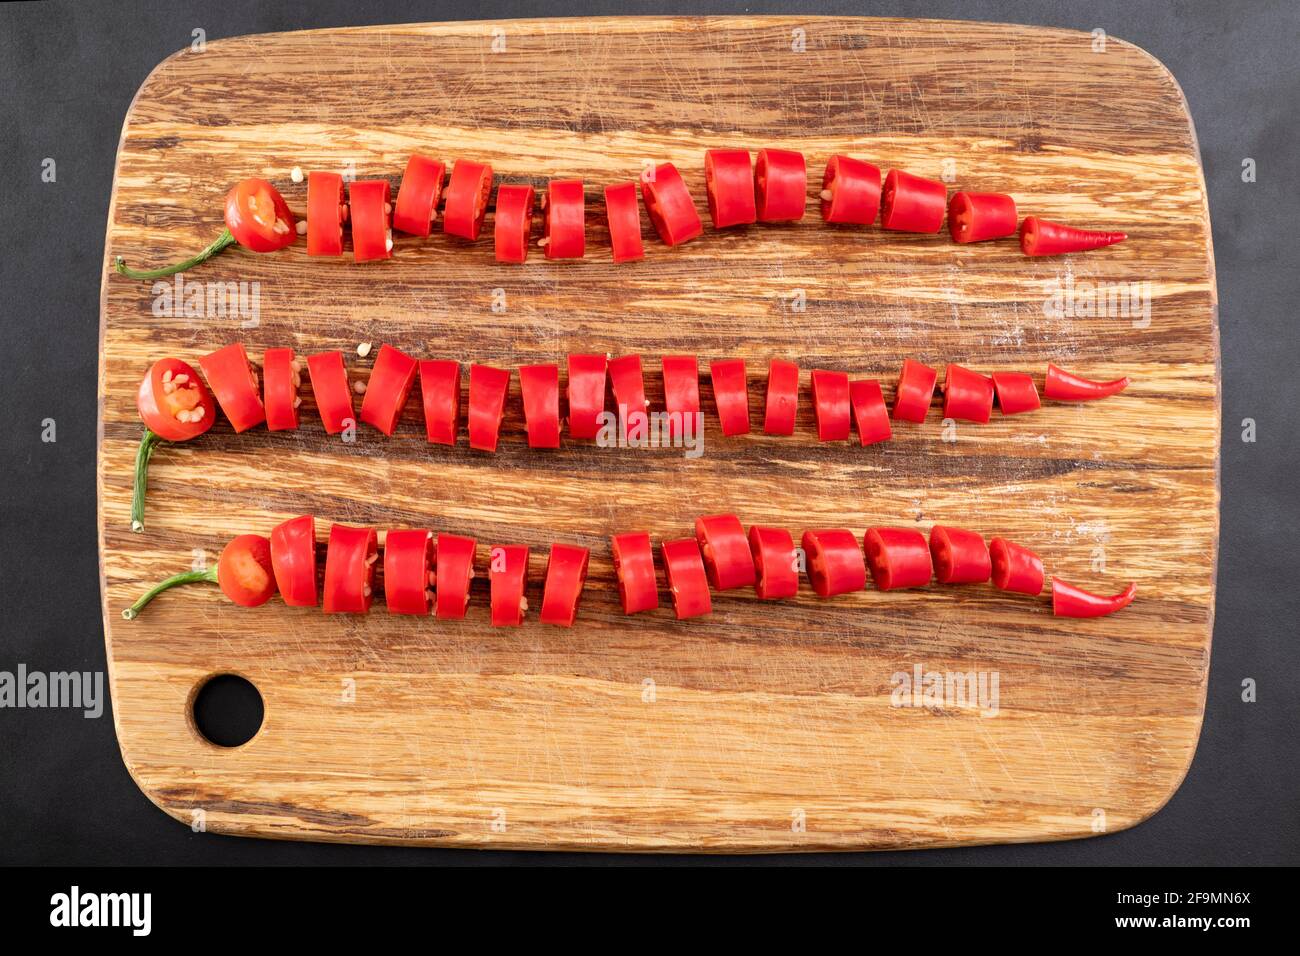 Cayenne, long red chili peppers sliced on cutting board Stock Photo